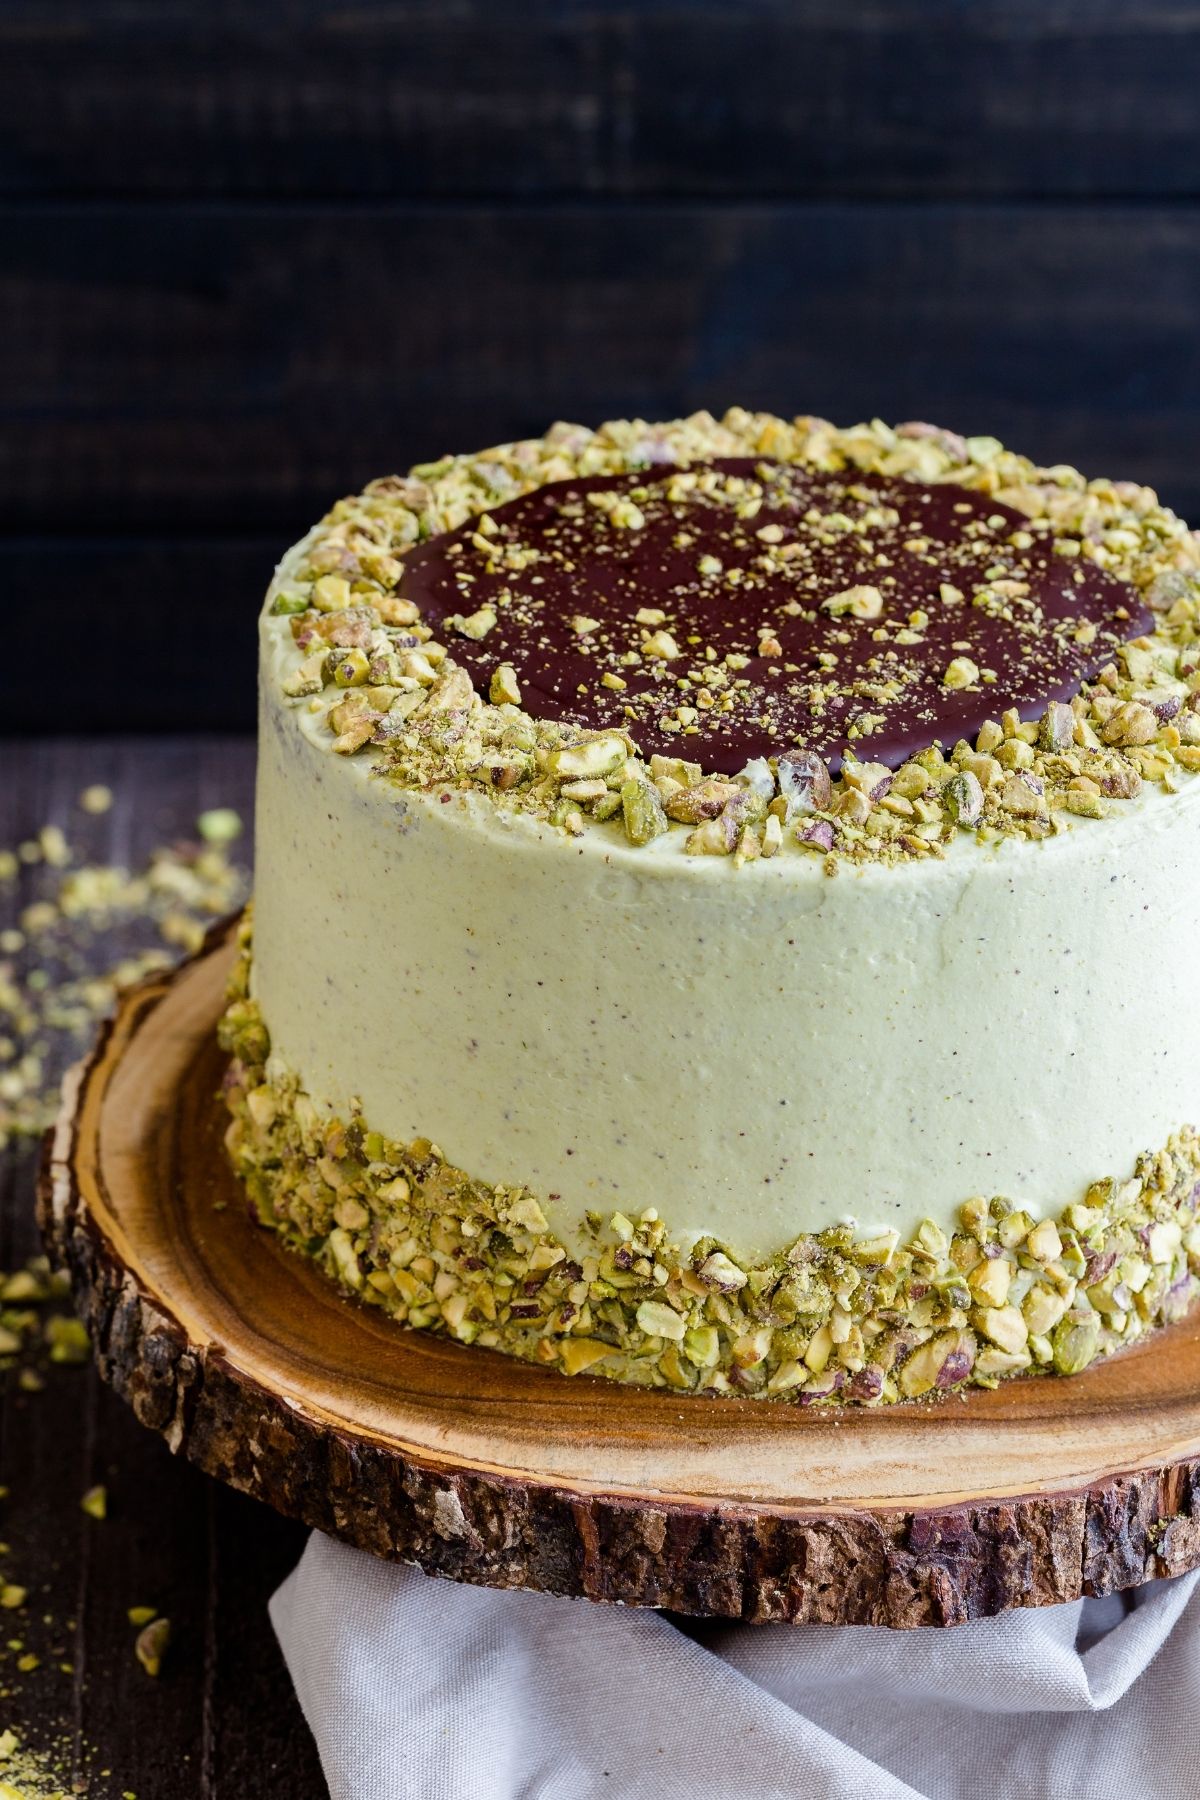 Chocolate pistachio cake on a wooden cake stand with a cream colored napkin around the base.